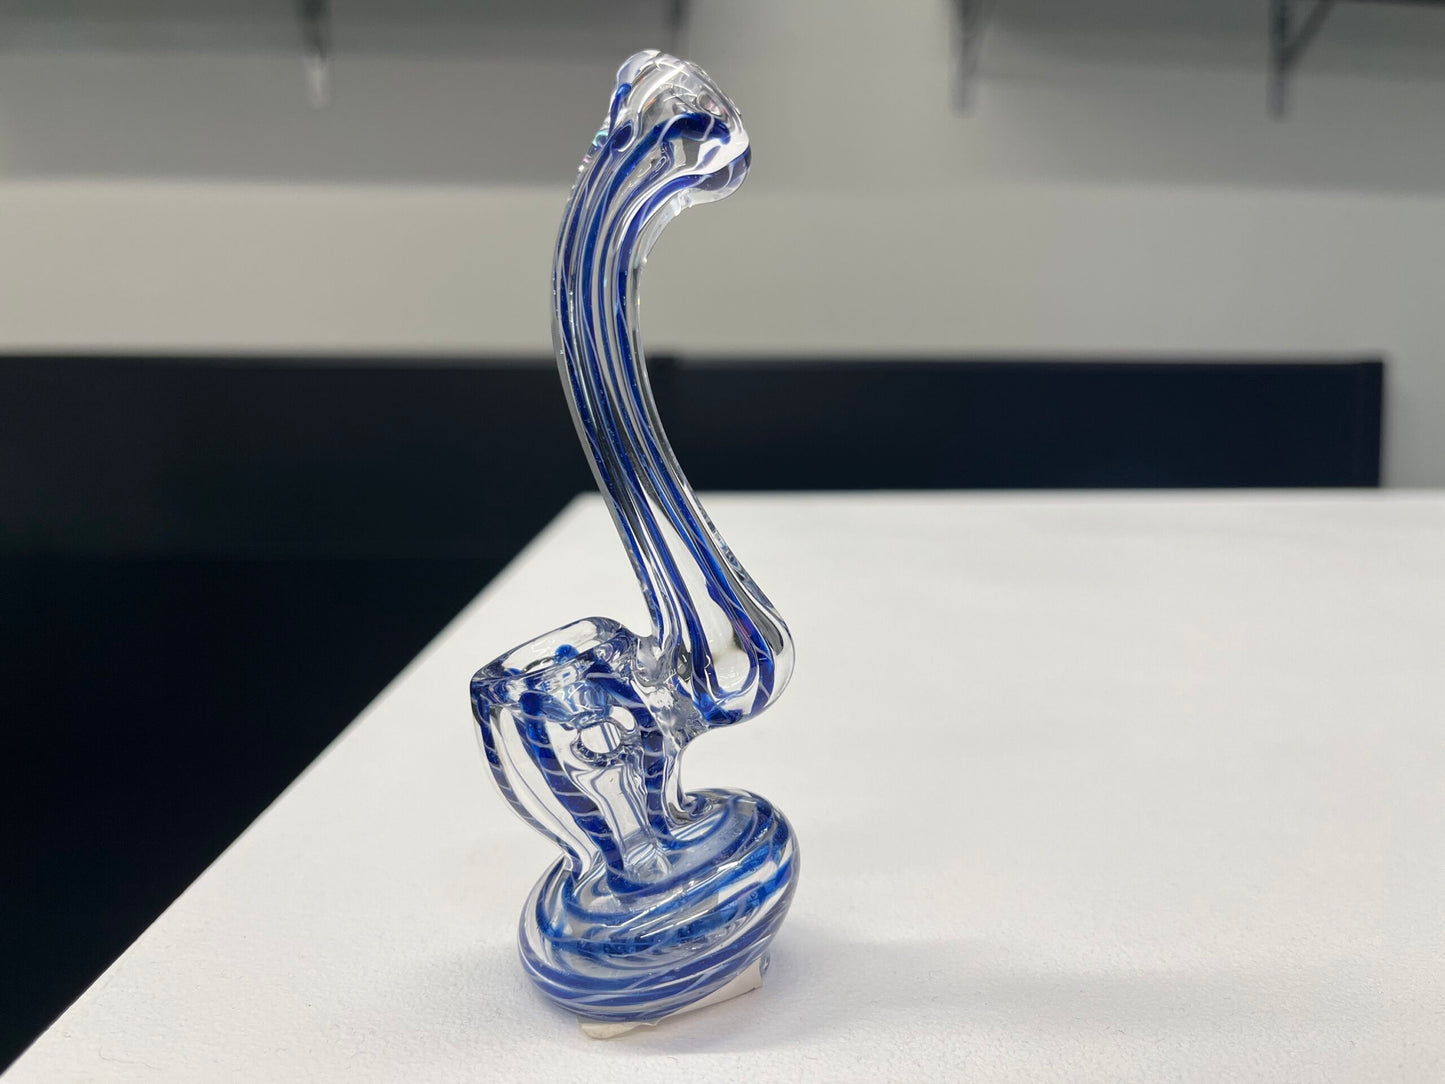 meticulously crafted design of the Extra Mini Bubbler Glass Pipe 4"